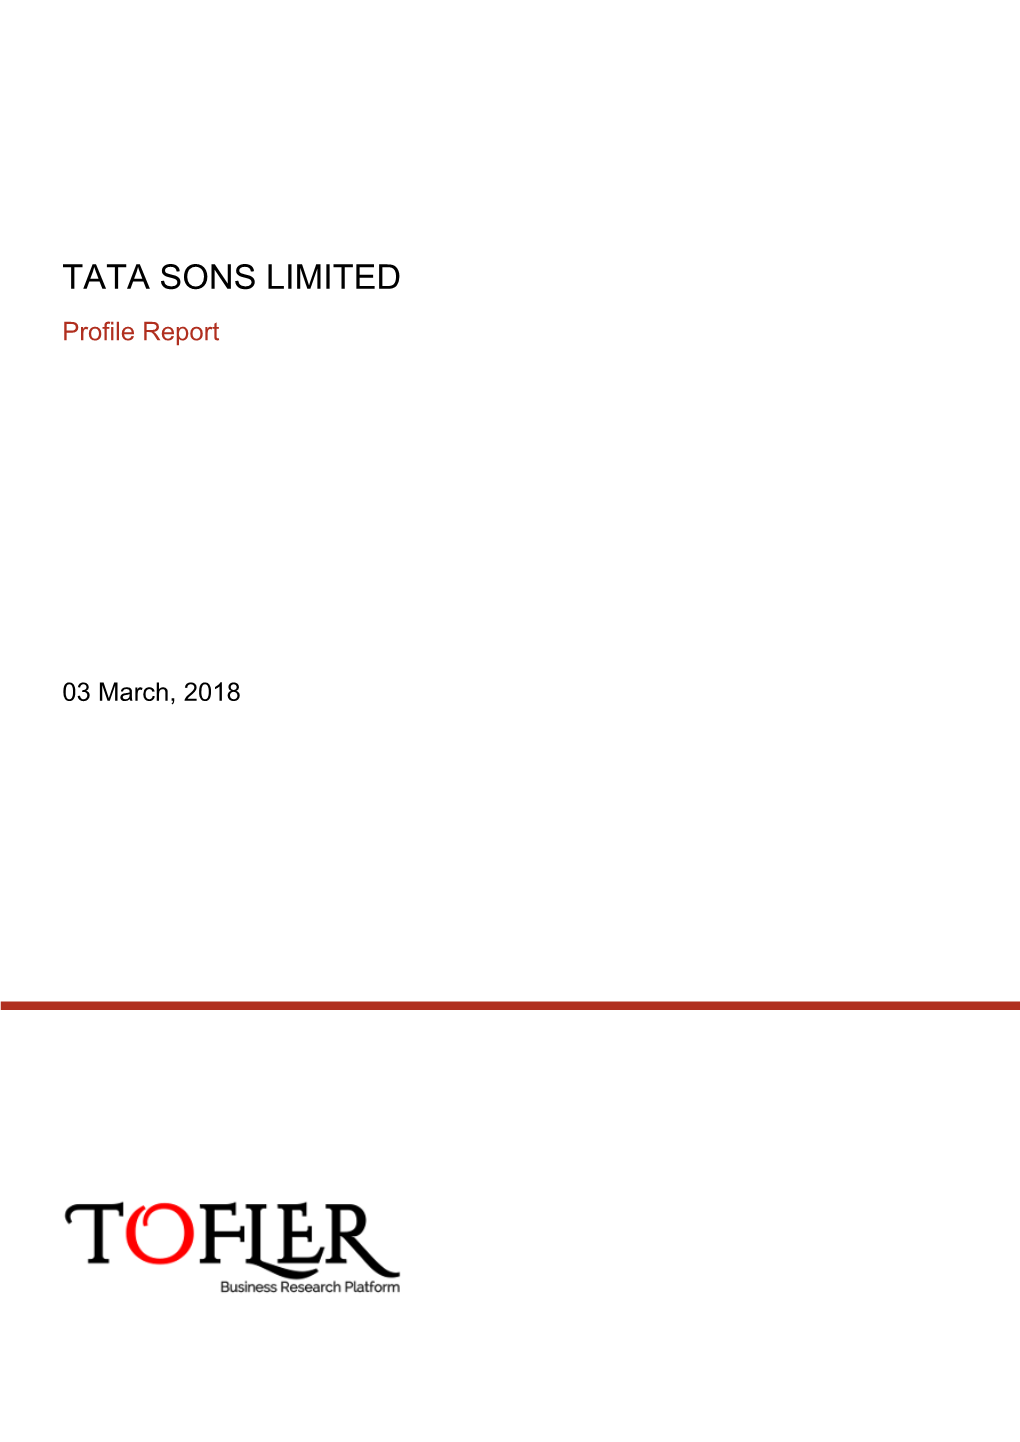 TATA SONS LIMITED Profile Report